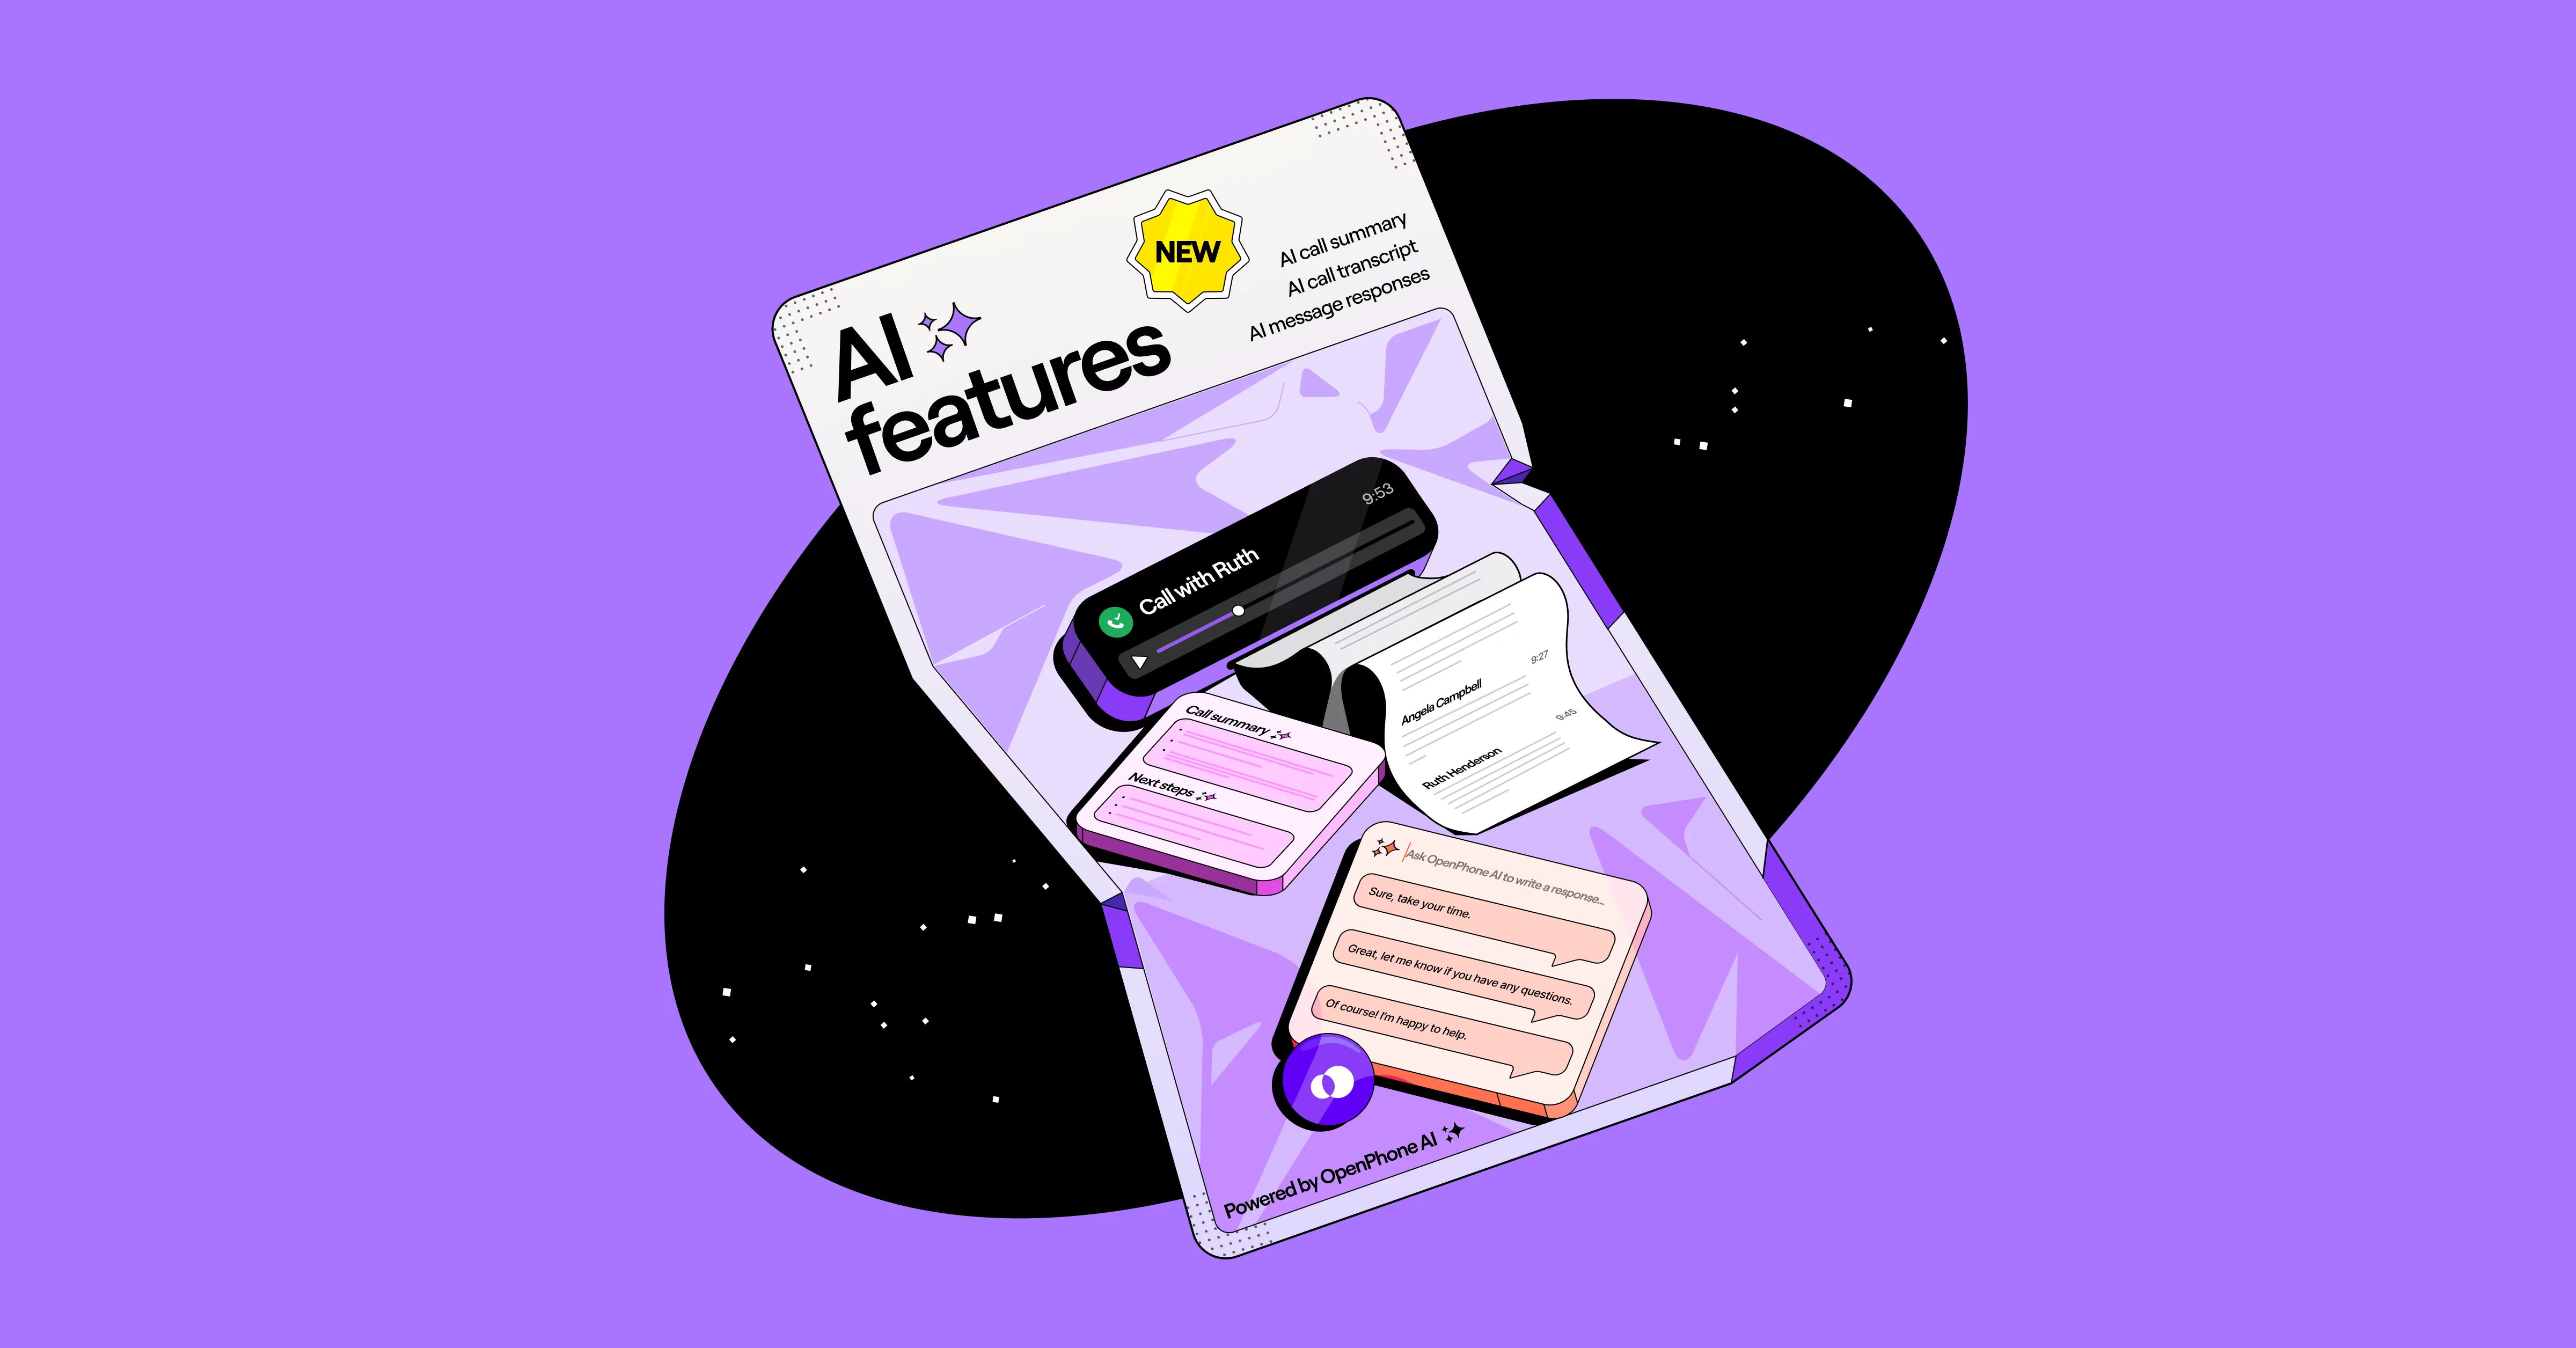 Introducing AI for OpenPhone